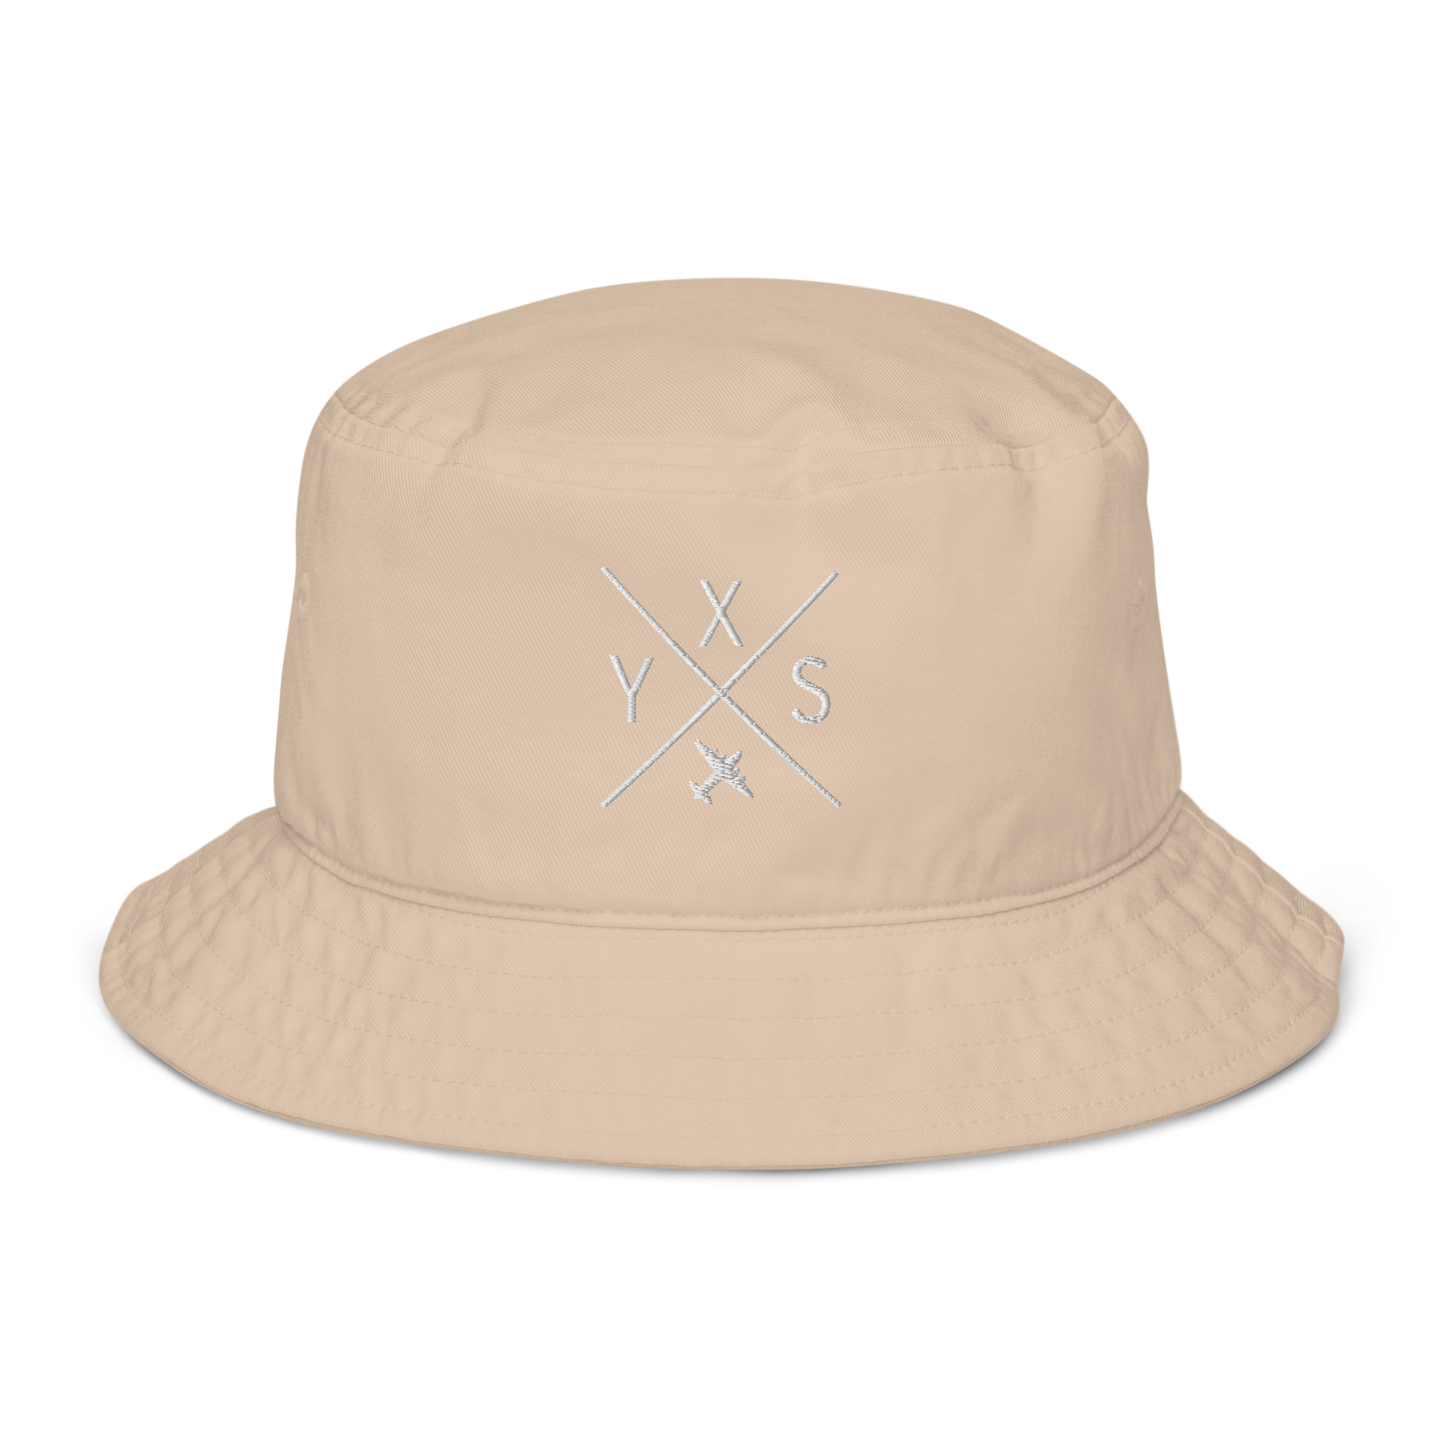 YHM Designs - YXU London Organic Cotton Bucket Hat - Crossed-X Design with Airport Code and Vintage Propliner - White Embroidery - Image 08